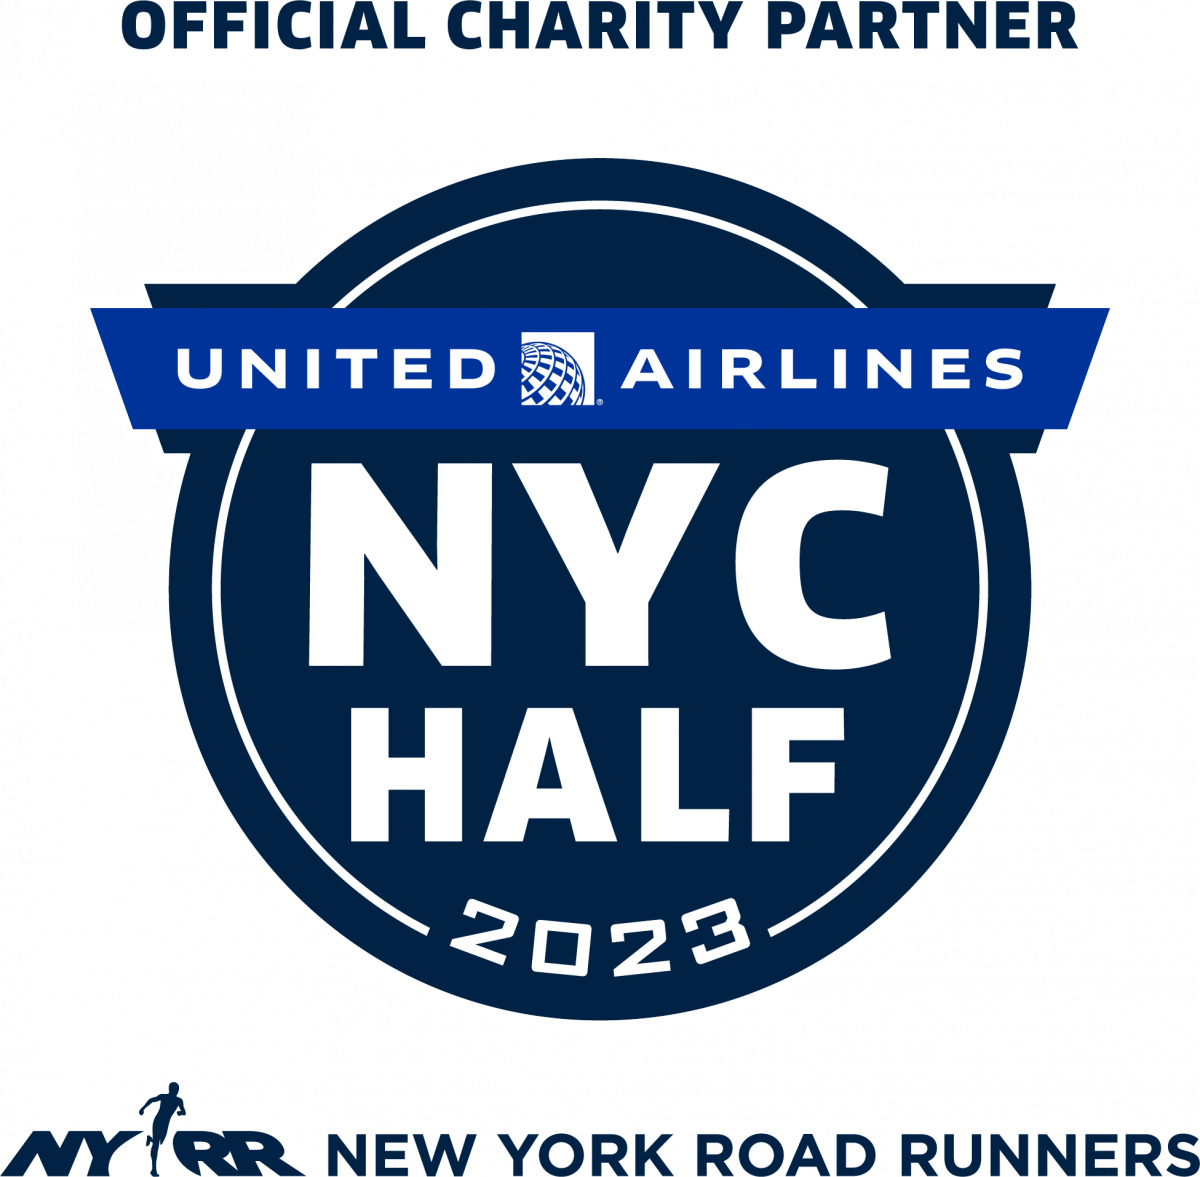 United Airlines NYC Half Marathon Logo - Official Charity Partner